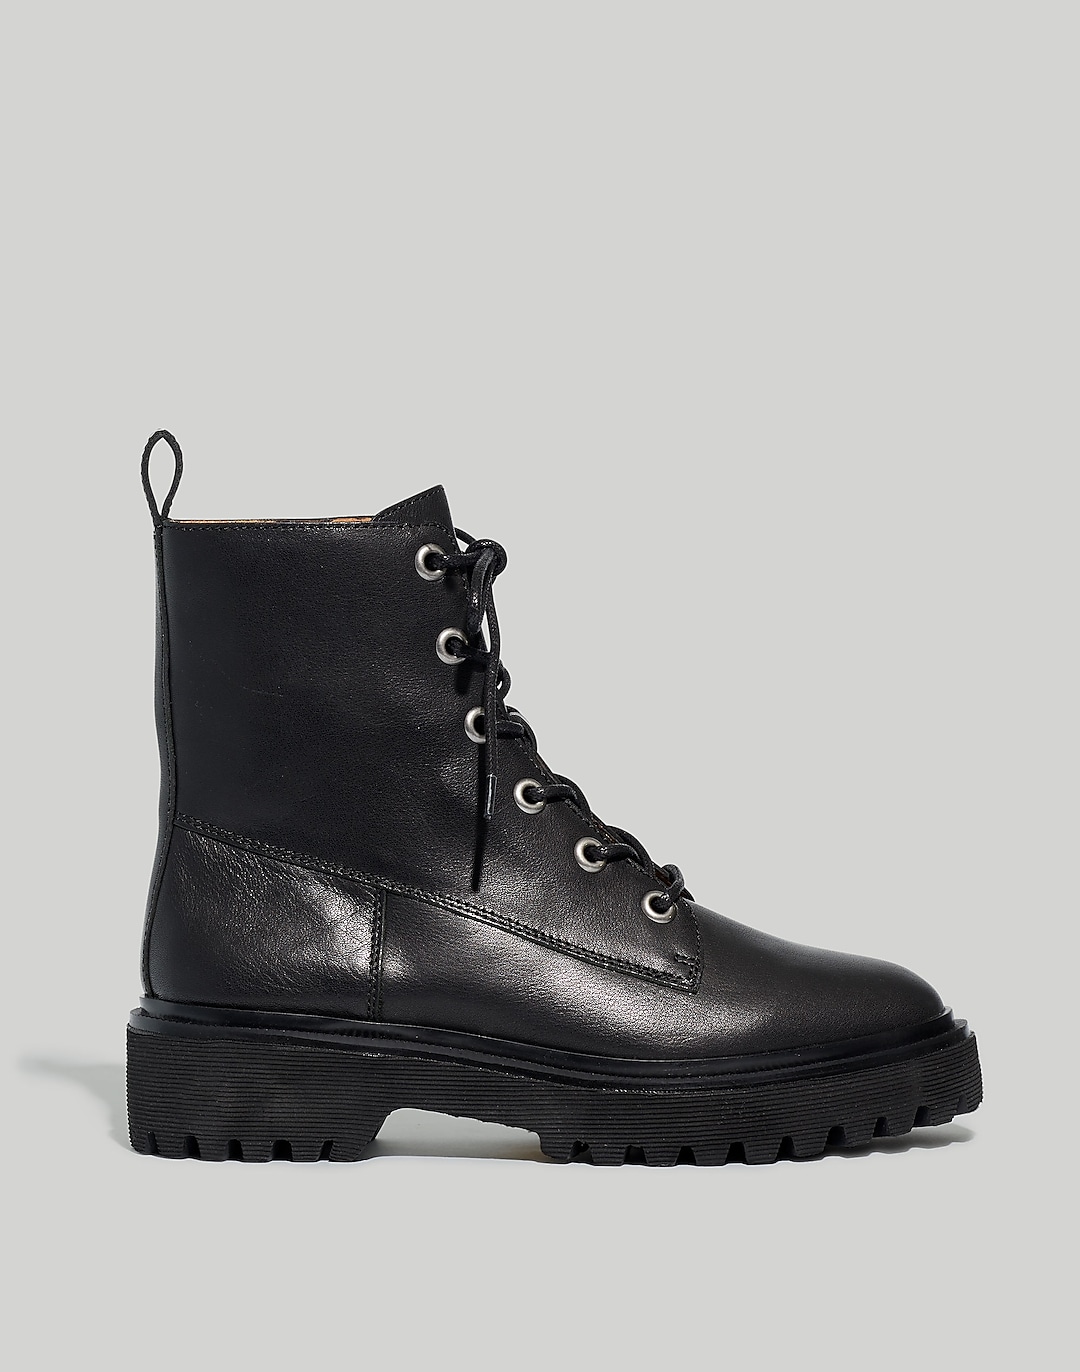 The Rayna Lace-Up Boot in Leather | Madewell